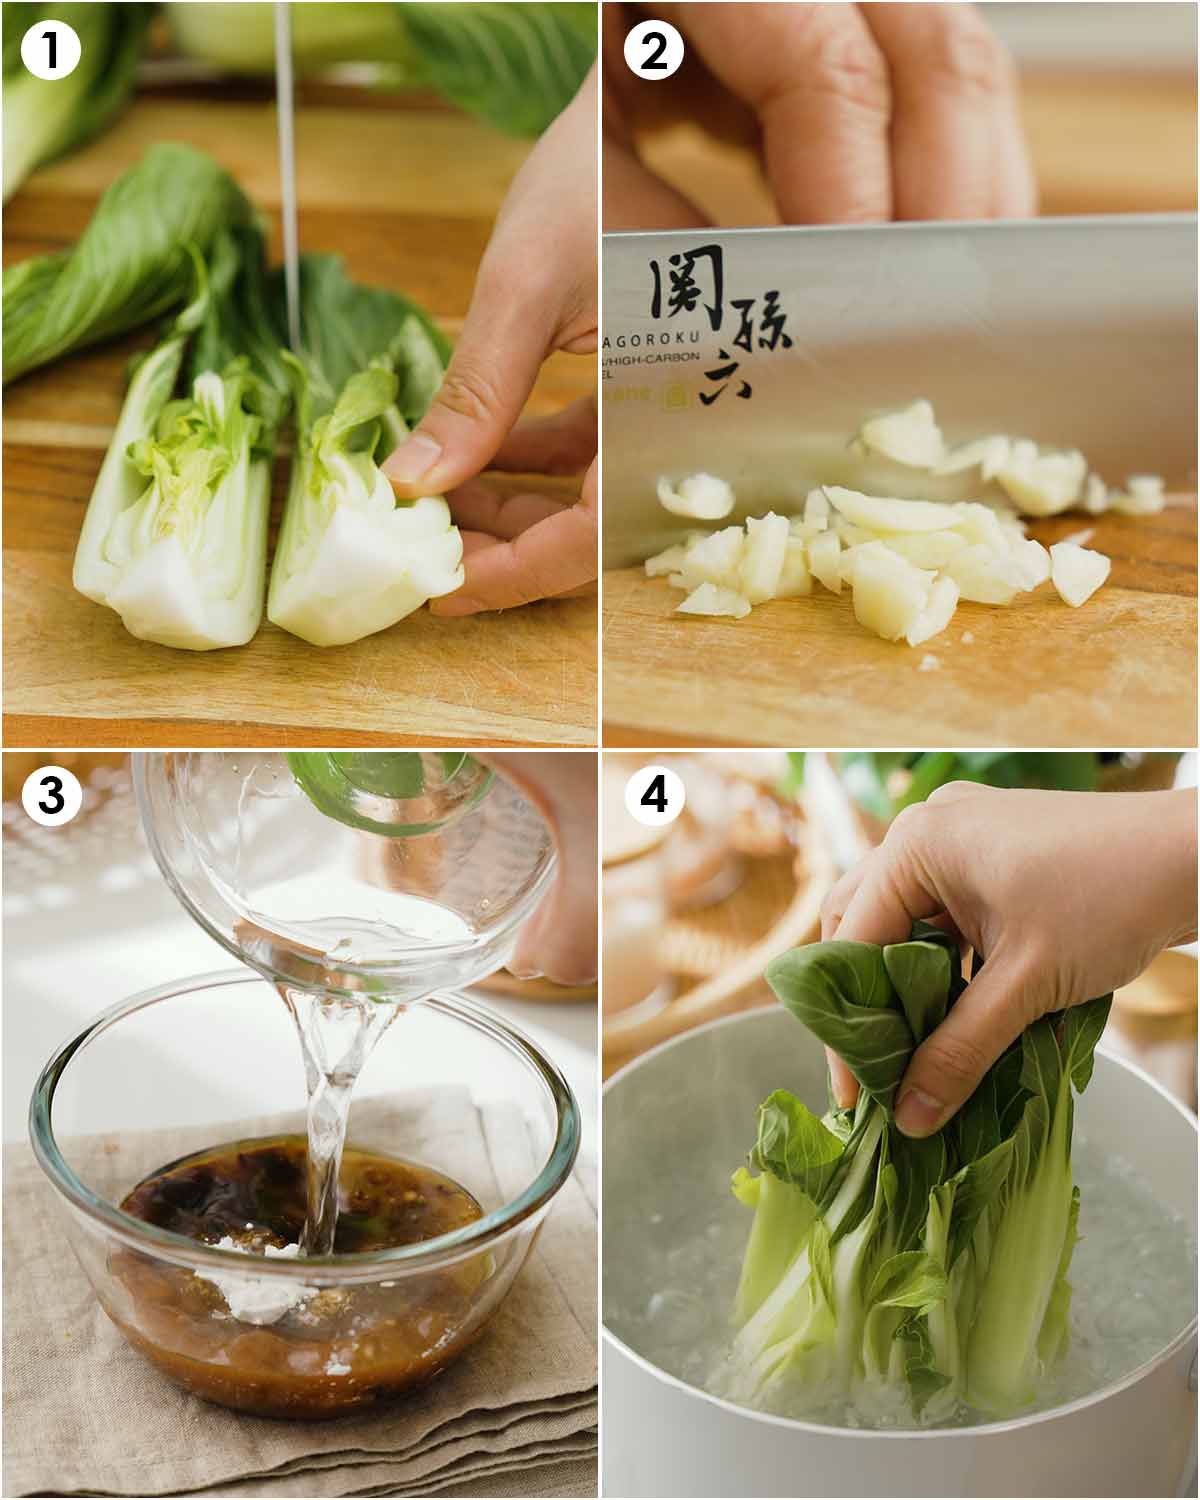 Four image collage showing how to prepare pak choi